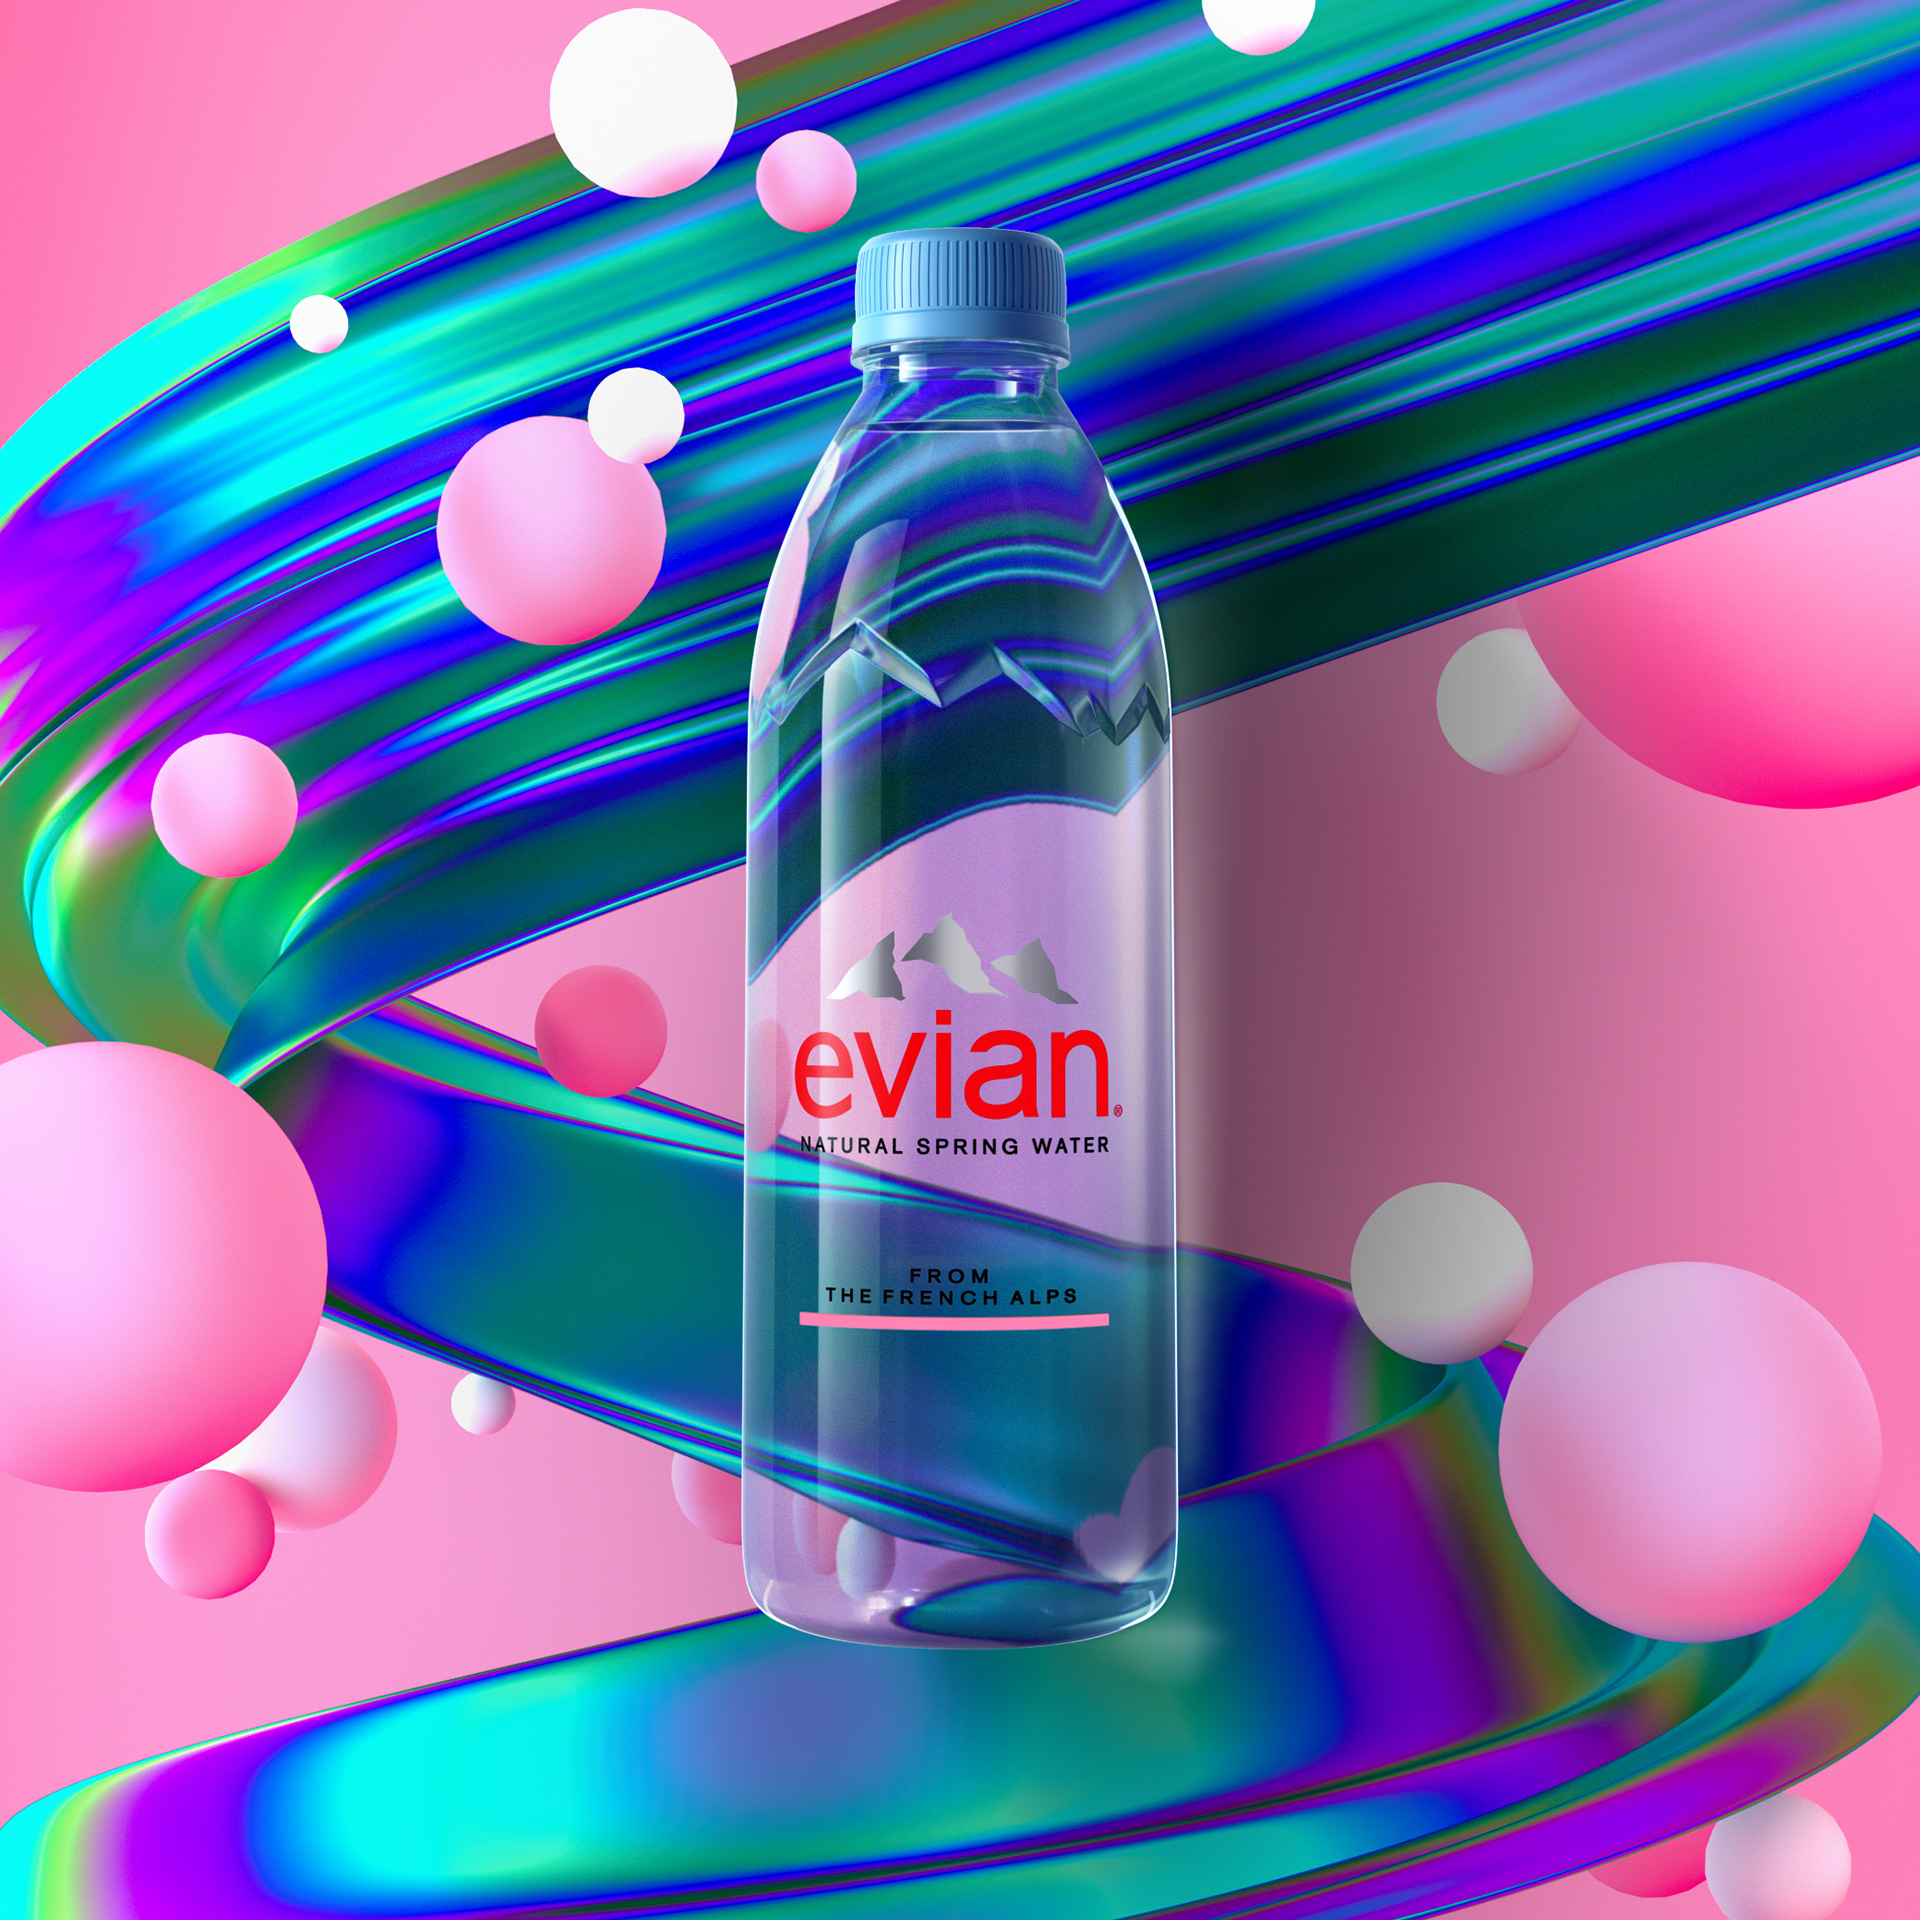 evianwater bottle art project on Behance72906e87745827.5dc1a4fb18bc1.jpg